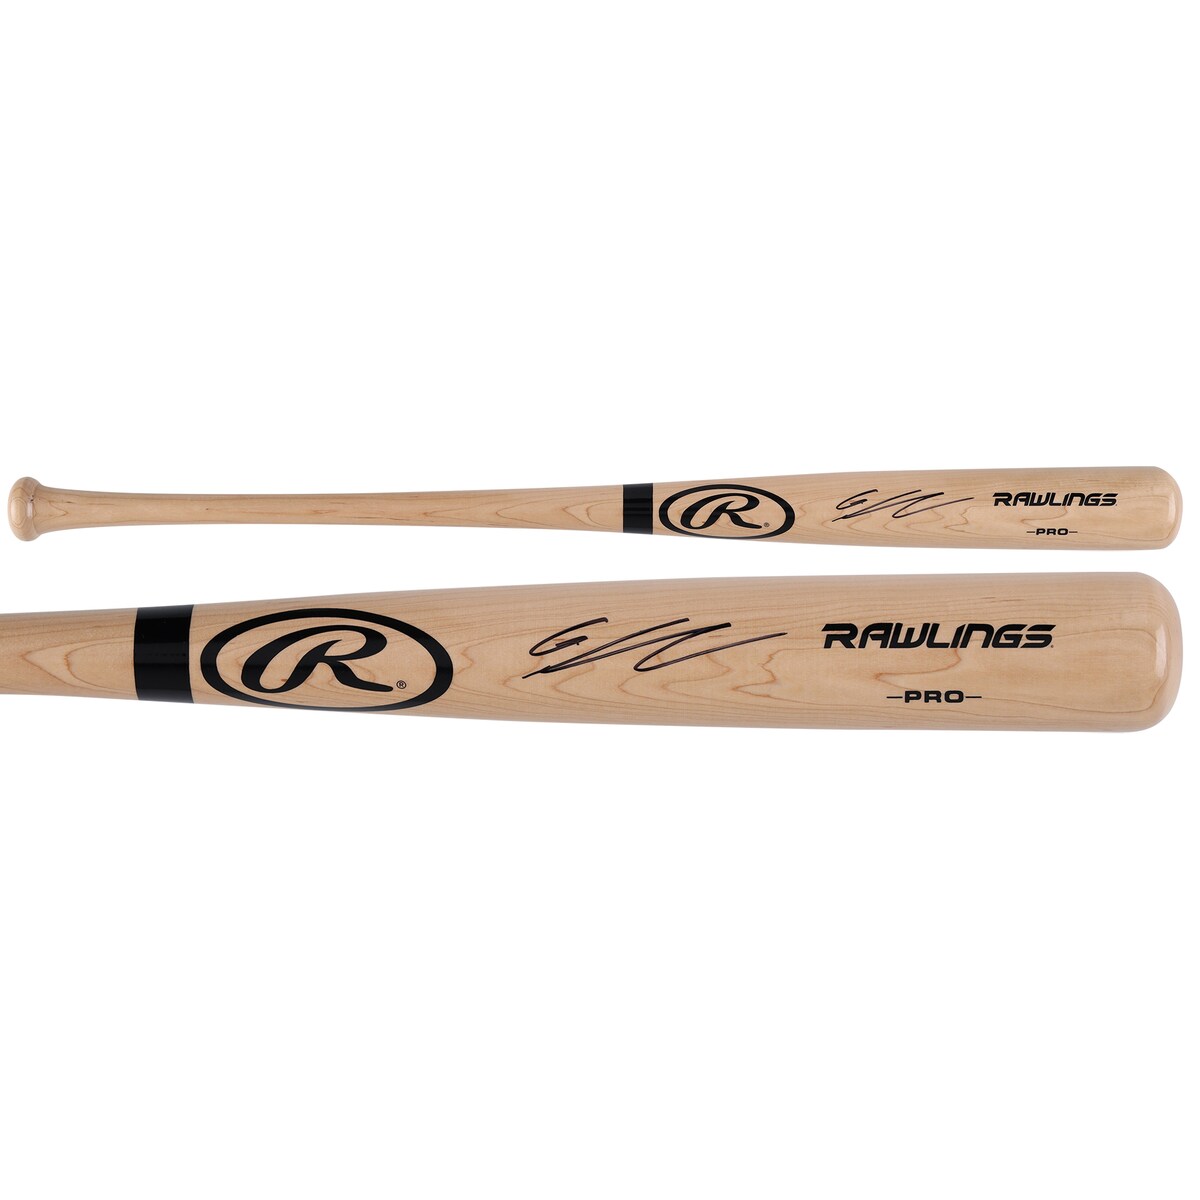 If Gunnar Henderson is your favorite player on the Baltimore Orioles, then be sure to add this autographed Rawlings Pro Bat to your collection. Featuring a hand-signed signature from the superstar infielder, this memorabilia is the perfect way to emphasize your support for Gunnar Henderson for years to come.Made in the USASignature may varyOfficially licensedBrand: Fanatics AuthenticObtained under the auspices of the Major League Baseball Authentication Program and can be verified by its numbered hologram at MLB.com